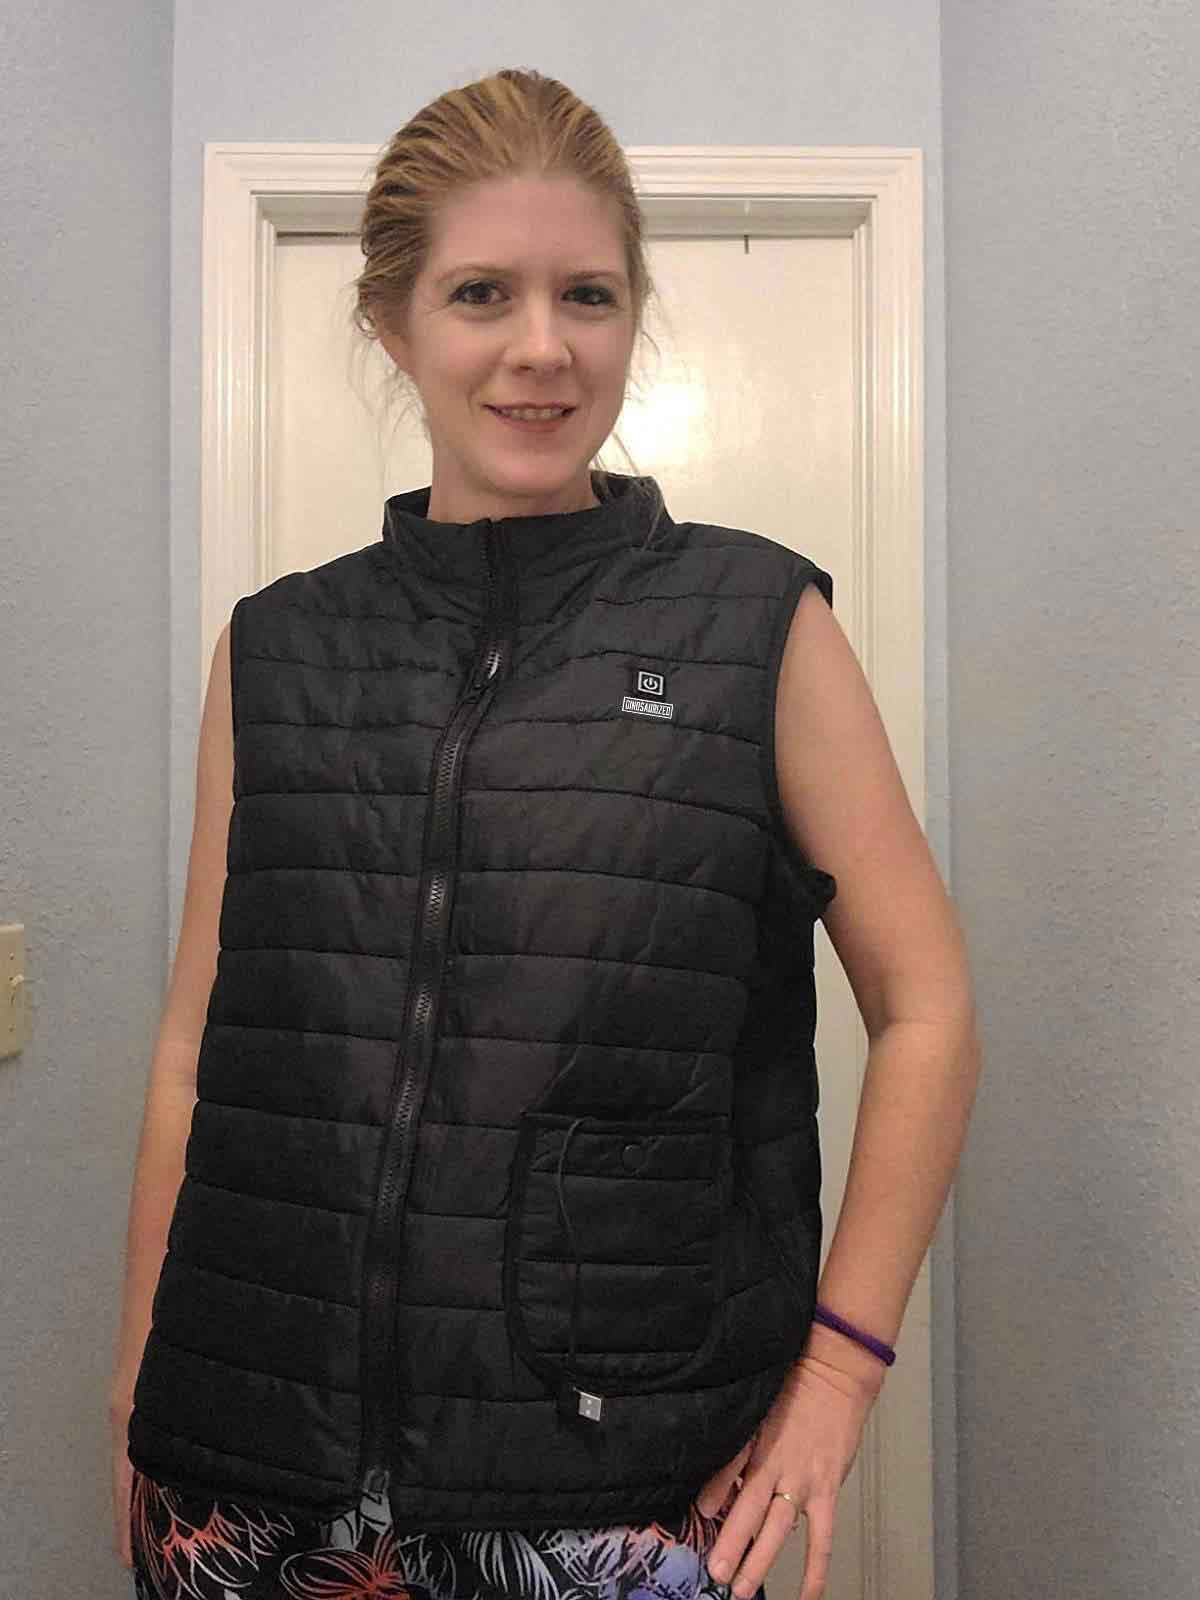 heated vest dragonfire |  Dragonfire heated vest| Dinosaurized Dragonfire heated vest|  Dinosaurized Dragonfire heat vest | heat vest | heated vest for men |  heated vest for women |  heated vest for hunting |  heated vest milwaukee |  heated vest battery pack |  heated vest motorcycle |  heated vest reviews |  heated vest battery |  heated vest amazon |  heated vest at walmart |  heated vest and gloves |  heated vest and pants |  heated vest at home depot |  heated vest arris |  heated vest aliexpress |  heated vest and coats |  the heated vest store |  the heated vest reviews |  charging a heated vest |  how does a heated vest work |  battery for a heated vest |  where to buy a heated vest |  how to use a heated vest |  battery pack for a heated vest |  heated vest best |  heated vest big and tall |  heated vest battery powered |  heated vest bass pro shop |  heated vest battery amazon |  heated vest by milwaukee |  e&b heated vest |  comfort b heated vest |  heated vest charger |  heated vest camo |  heated vest cheap |  heated vest costco |  heated vest clearance |  heated vest controller |  heated vest cycle gear |  heated vest columbia |  heated vest dewalt |  heated vest directions |  heated vest deals |  heated vest drysuit |  heated vest diving |  heated vest diy |  heated vest dublin |  heated dog vest |  funny d heated vest |  heated vest ebay |  heated vest electric |  heated vest eddie bauer |  heated vest edmonton |  heated equestrian vest |  milwaukee heated vest ebay |  usb heated vest ebay |  heated vest for elderly |  heated vest for motorcycle |  heated vest for golf |  heated vest for motorcycle riding |  heated vest for dogs |  heated vest for skiing |  fr heated vest |  heated vest golf |  heated vest gif |  heated vest gerbing |  heated vest gobi |  heated vest gilet |  heated vest go outdoors |  heated vest gander outdoors |  heated vest geelong |  heated vest hunting |  heated vest home depot |  heated vest harley davidson |  heated vest horse riding |  heated vest hunting forum |  heated vest how to use |  heated vest how does it work |  heated vest hammacher schlemmer |  h bomb heated vest |  ripcurl h-bomb heated vest |  h-bomb power heated vest |  heated vest instructions |  heated vest instagram |  heated vest in store |  heated vest imaginefish |  heated vest ireland |  heated vest in canada |  heated vest india |  heated jacket india |  heated vest jacket |  heated vest jacket reviews |  jscru heated vest reviews |  jett heated vest |  jetletso heated vest |  heated vest vs jacket |  electric vest heated jacket usb |  electric vest heated jacket |  j.pin heated vest |  heated vest kohls |  heated vest kelowna |  heated vest keis |  heated vest kickstarter |  milwaukee heated vest kit |  heated vest rural king |  milwaukee heated vest kit xl |  heated vest hong kong |  heated vest liner |  heated vest lowes |  heated vest lower back |  heated vest ladies |  heated vest ll bean |  heated vest launceston |  heated vest local |  heated vest lithium powerpack |  heated vest mens |  heated vest made in usa |  heated vest mens walmart |  heated vest menards |  heated vest milwaukee xl |  heated vest makita |  m12 heated vest |  milwaukee m12 heated vest |  heated vest near me |  heated vest north face |  heated vest not working |  heated vest nz |  heated vest neck |  heated vest next day delivery |  heated vest new zealand |  heated vest neoprene |  heated vest ororo |  heated vest on amazon |  heated vest or jacket |  heated vest on sale |  heated vest on facebook |  heated vest on ebay |  heated vest or coat |  heated vest operation |  heated vest power bank |  heated vest pnuma |  heated vest pro |  heated vest plus size |  heated vest power pack |  heated vest plug in |  heated vest pacemaker |  heated vest power supply |  heated quilted vest |  heated quilted vest kit |  quiksilver heated vest |  qvc heated vest |  quality heated vest |  heated vest rechargeable |  heated vest rei |  heated vest reddit |  heated vest rechargeable battery |  heated vest ratings |   heated vest reviews 2019 |  heated vest scheels |  heated vest sale |  heated vest scuba |  heated vest settings |  heated vest shopify |  heated vest surfing |  heated vest skiing |  heated vest safety |  heated vest target |  heated vest tractor supply |  heated vest top rated |  heated vest toronto |  heated vest tall |  heated vest thermal usb |  heated vest total tools |  heated vest thin |  heated vest usb |  heated vest unisex |  heated vest under $50 |  heated vest usb power bank |  heated vest usa |  heated vest usb power bank-electric rechargeable |  heated vest usb battery |  heated vest uk |  heated vest volt |  heated vest video |  heated vest venture |  heated vest voltage |  heated vest and hoodie |  heated vest vancouver |  heated vest victoria bc |  12v heated vest |  v neck heated vest |  heated vest womens |  heated vest with battery pack |  heated vest walmart |  heated vest with battery |  heated vest with power bank |  heated vest with hood |  heated vest waterproof |  heated vest with heated pockets |  heated vest xxl |  heated vest xs |  heated vest xl |  milwaukee heated vest xl |  milwaukee heated vest xxl |  keis heated vest x10 |  mens heated vest xl |  iconx heated vest |  gen x heated vest |  heated vest youth |  heated vest youtube |  yisheng heated vest |  yosoo heated vest |  ykk heated vest |  yzf dbsx heated vest |  yamaha heated vest |  heated jacket zippay zarkie heated vest |  zepto heated vest |  zlt heated vest |  zoeetree heated vest |  heated vest 12v |  heated vest 18v |  heated vest 15 hours |  heated motorcycle vest 12v |  makita heated vest 18v |  makita heated vest 12v |  heated vest under 100 | |   1st heated vest review |  #1 heated vest |  1hstl heated vest |  heated vest 29.99 |  heated vest 2.0 |  heated vest 2xl |  |  heated vest 2020 |  heated vest 2019 |  best heated vest 2019 |  best heated vest 2020 |  smart heated vest 2.0 |  exo 2 heated vest |  ducati comfort 2 heated vest |  heated vest 3xl |  milwaukee heated vest 3xl |  mens heated vest 3xl |  milwaukee heated vest 303-21 |  37 heated vest |  3m heated vest |  360 heated vest |  3xlt heated vest |  heated vest 4xl |  heated vest 4x |  heated vest $40 |  mens heated vest 4xl |  milwaukee heated vest 4xl |  gears gen x4 heated vest |  heated vest 5xl |  mens heated vest 5xl |  5v heated vest |  5x heated vest |  5xlt heated vest |  top 5 heated vest |  5 volt heated vest |  big 5 heated vest |  5 volt battery for heated vest |  heated vest 6xl |  6x heated vest |  arris heated vest 7.4v |  gerbing heated vest 7v |  7v heated vest |  7.4v heated vest |  7xl heated vest |  7 volt heated vest | 